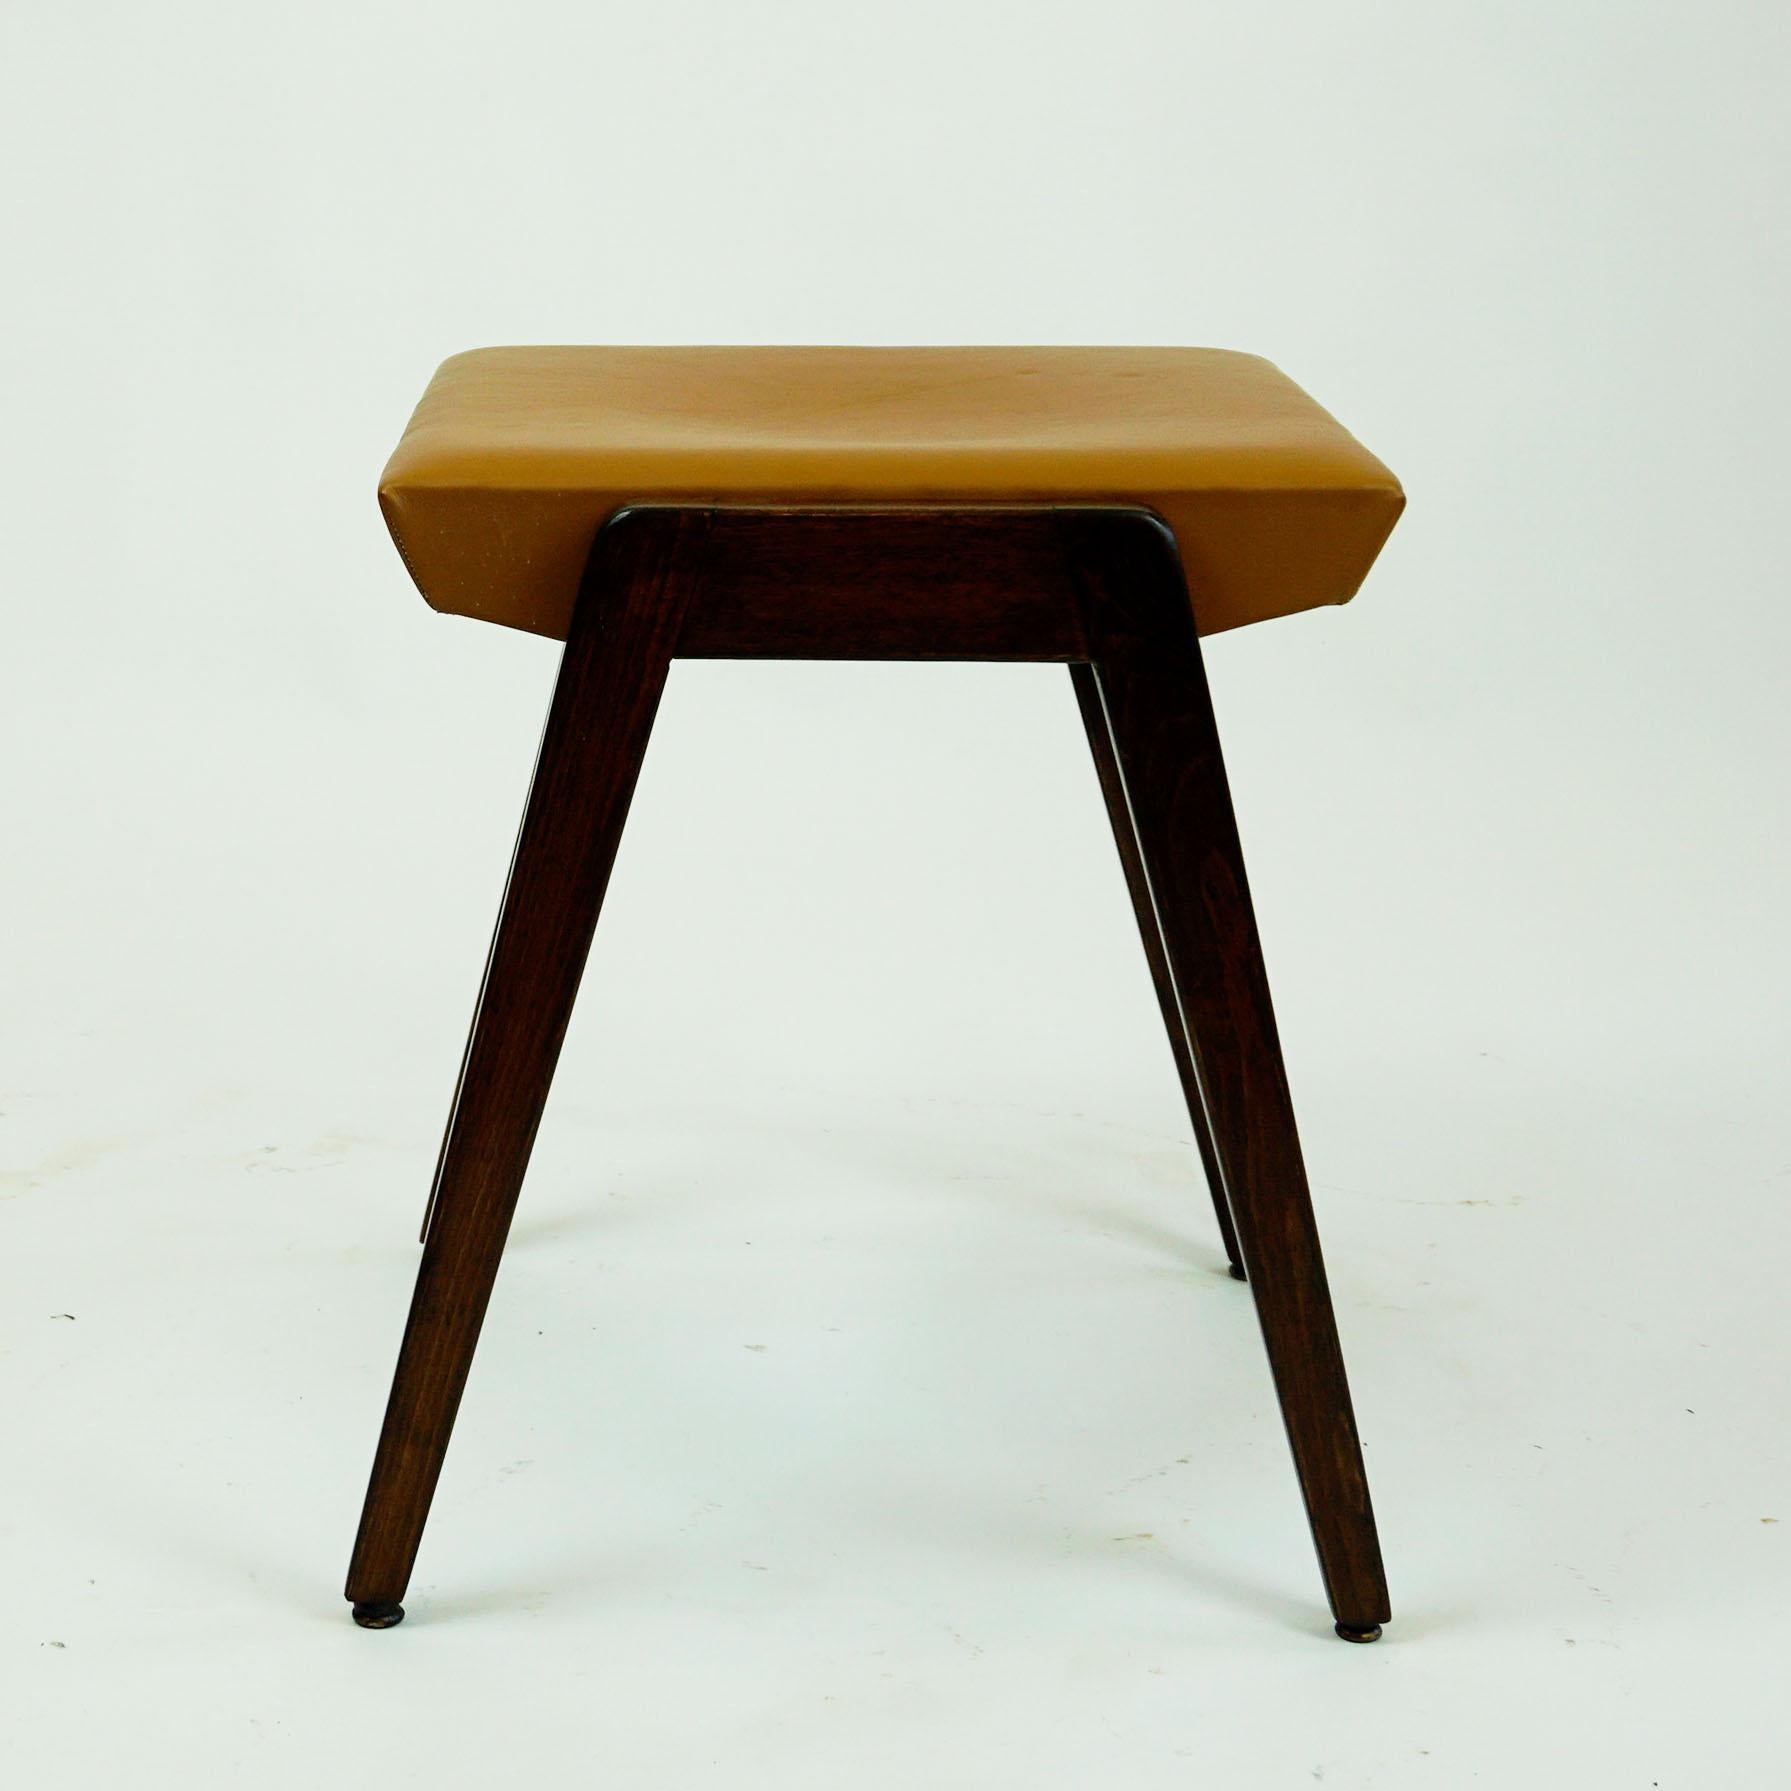 Mid-20th Century Austrian Midcentury Beech and Cognac Brown Leather Stool by Franz Schuster